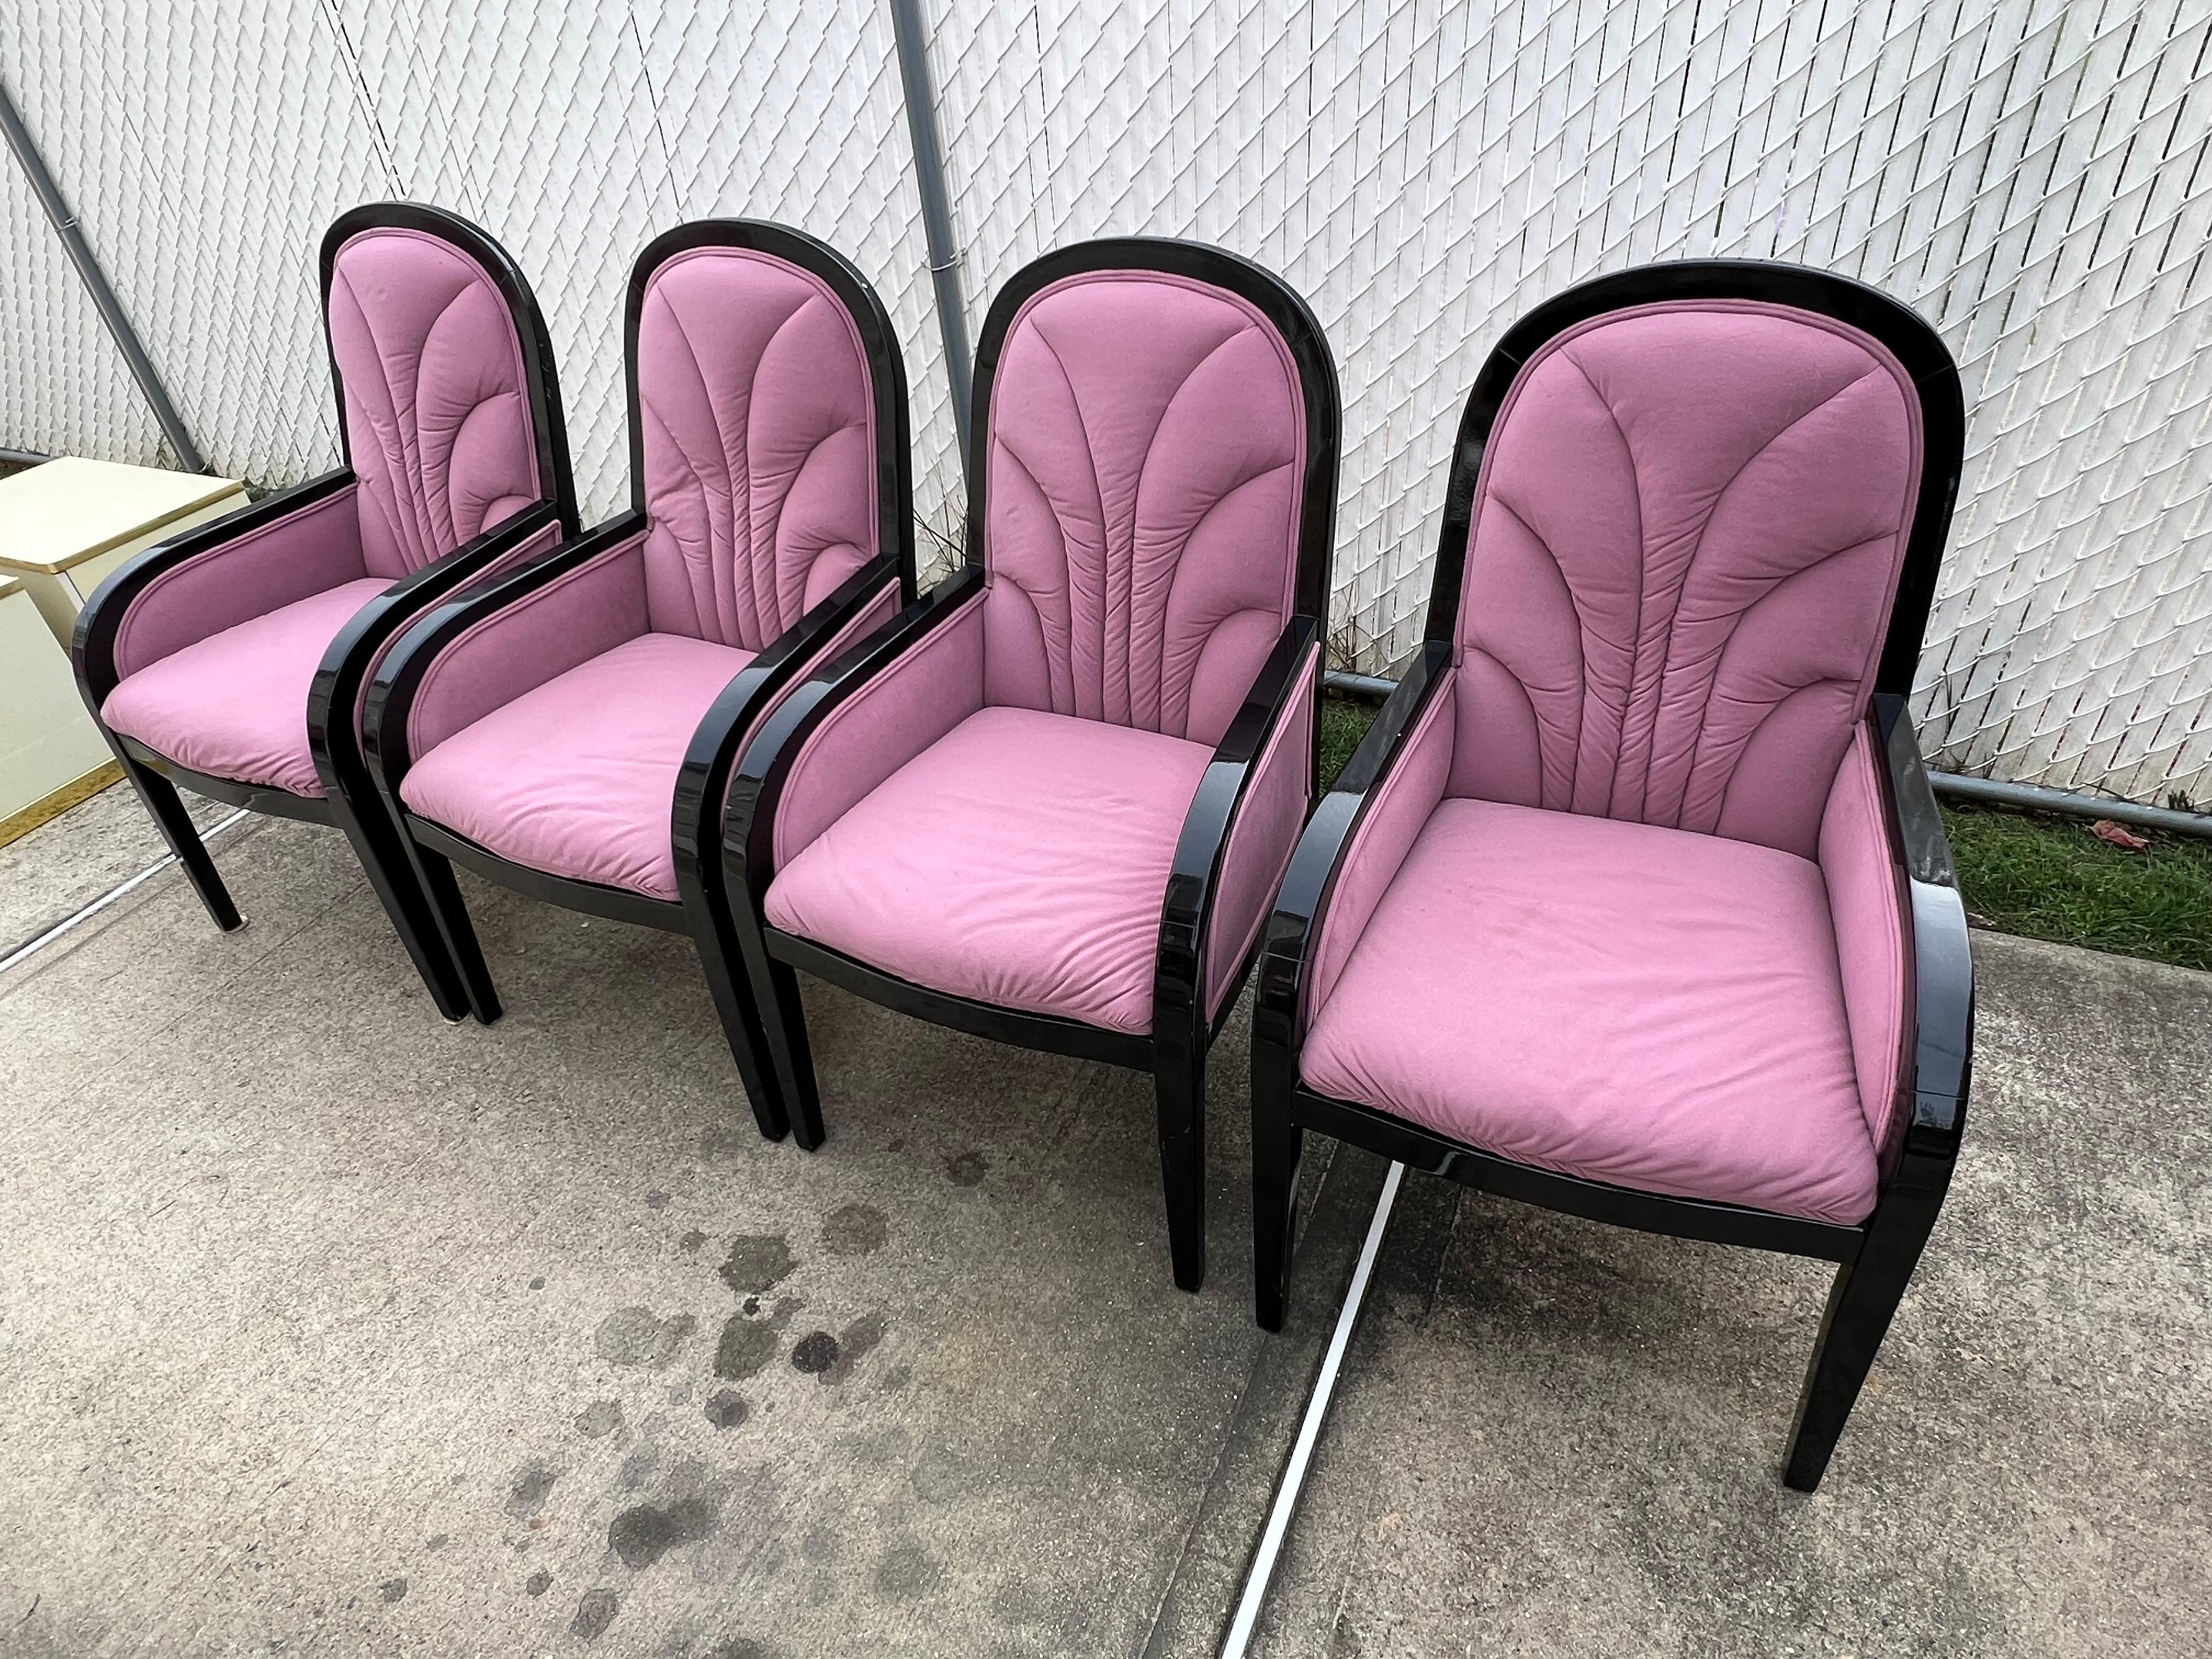 1980s Black Lacquered Pink Velvet Dining Chairs - a Set of 4. 

Black lacquered arm rest and the arched back make these chairs scream 80s.